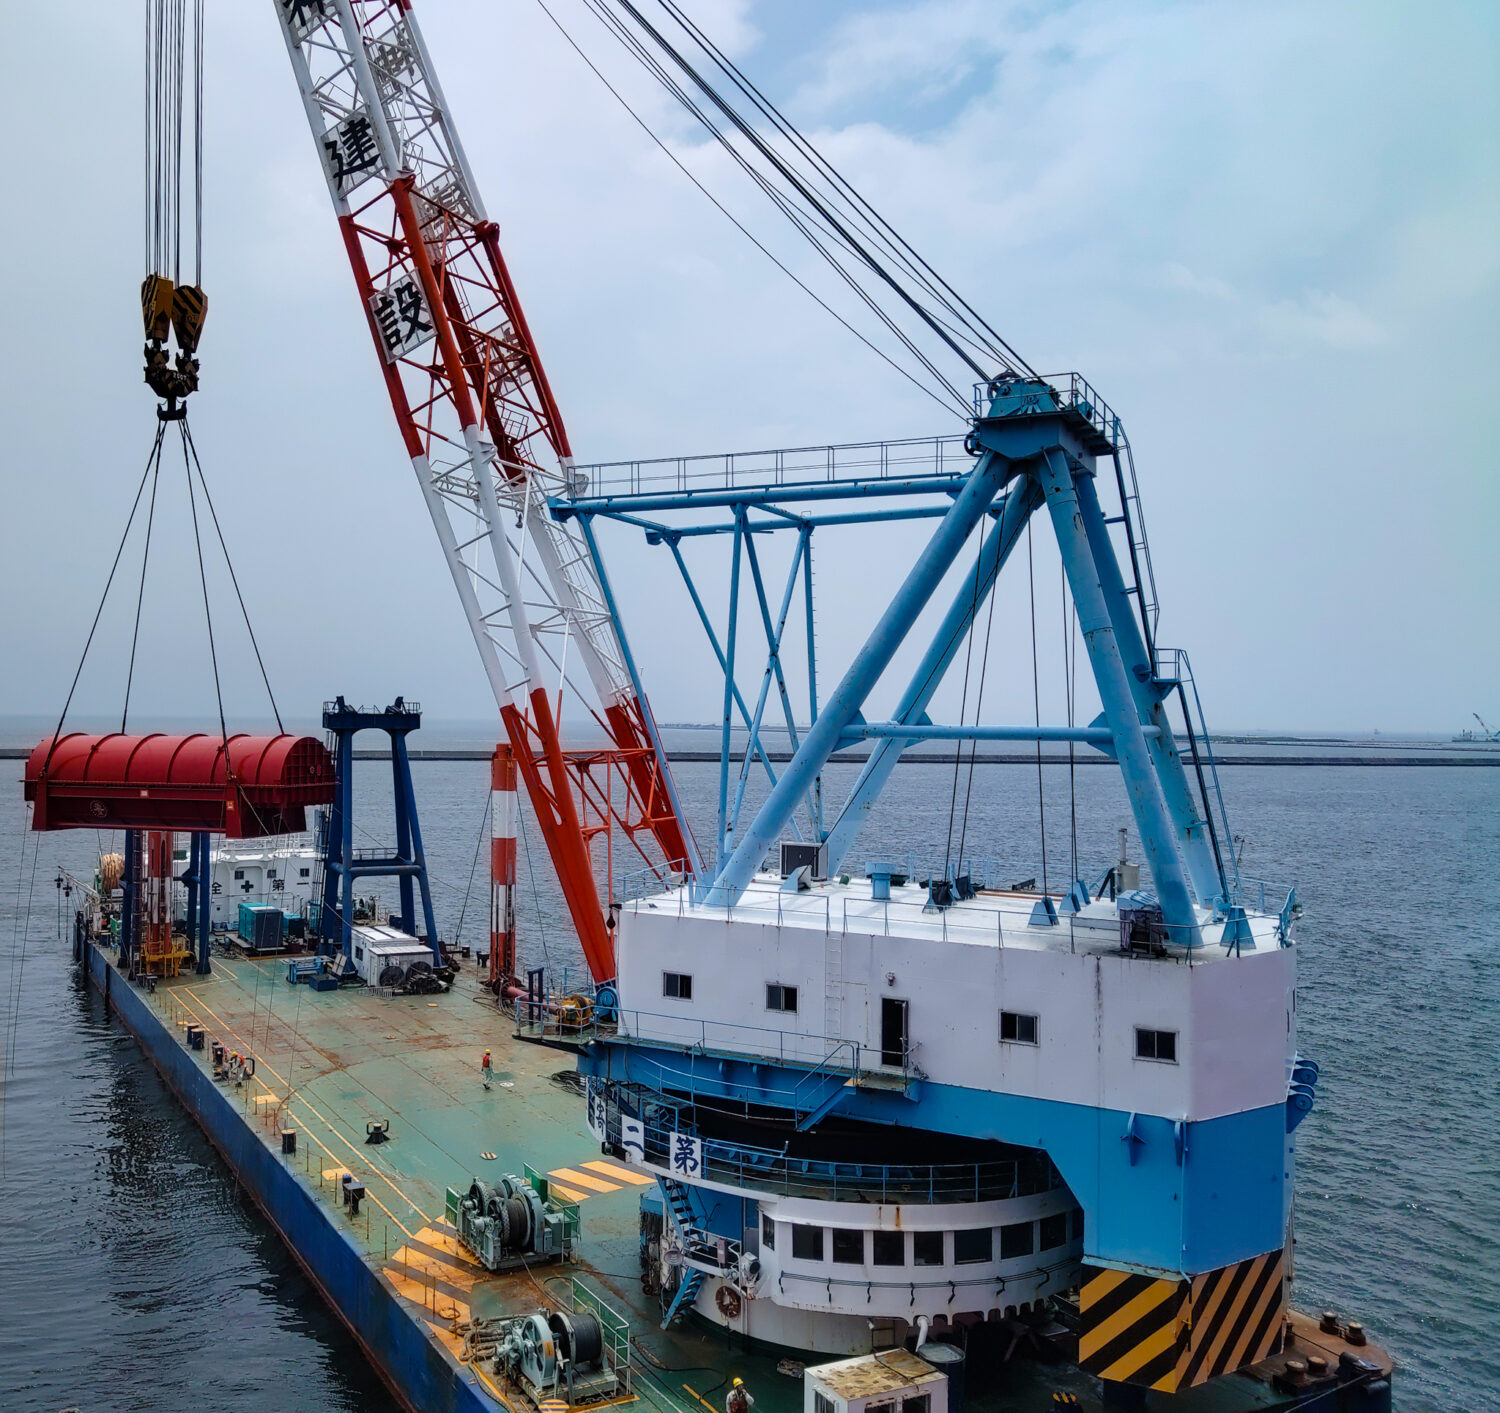 OIA completed a massive cost-saving breakbulk solution from Japan to Europe. This picture shows the gas turbine rotor in its enclosure as a floating crane lifts it for its journey to the Netherlands.